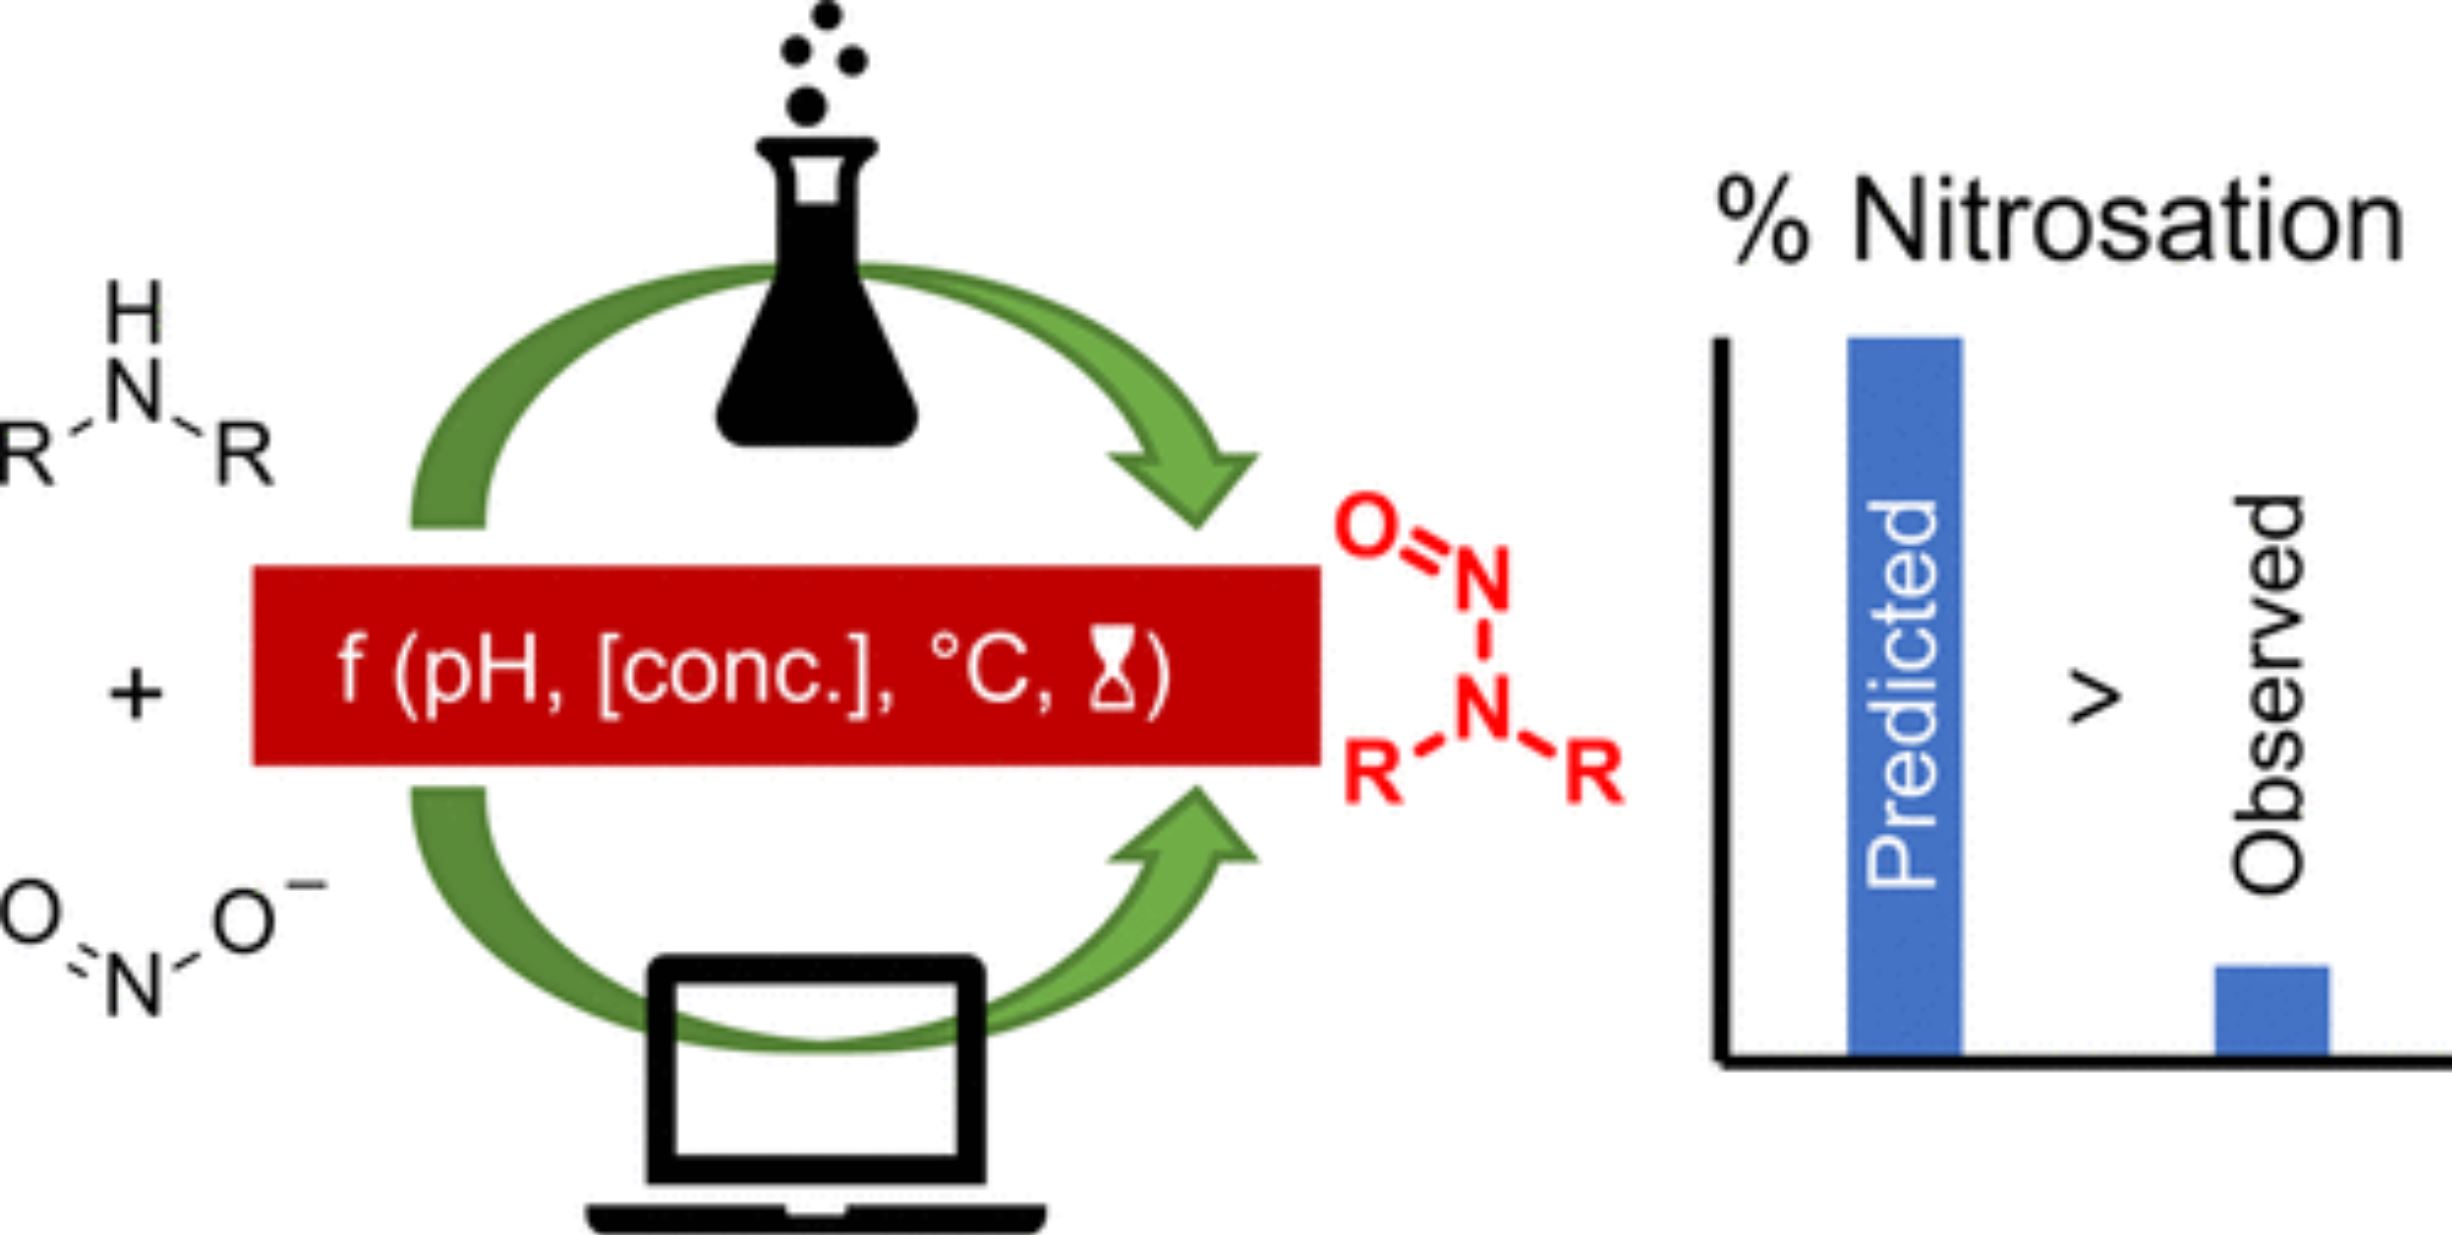 Formation of Dialkyl-N-nitrosamines in Aqueous Solution: An Experimental Validation of a Conservative Predictive Model and a Comparison of the Rates of Dialkyl and Trialkylamine Nitrosation